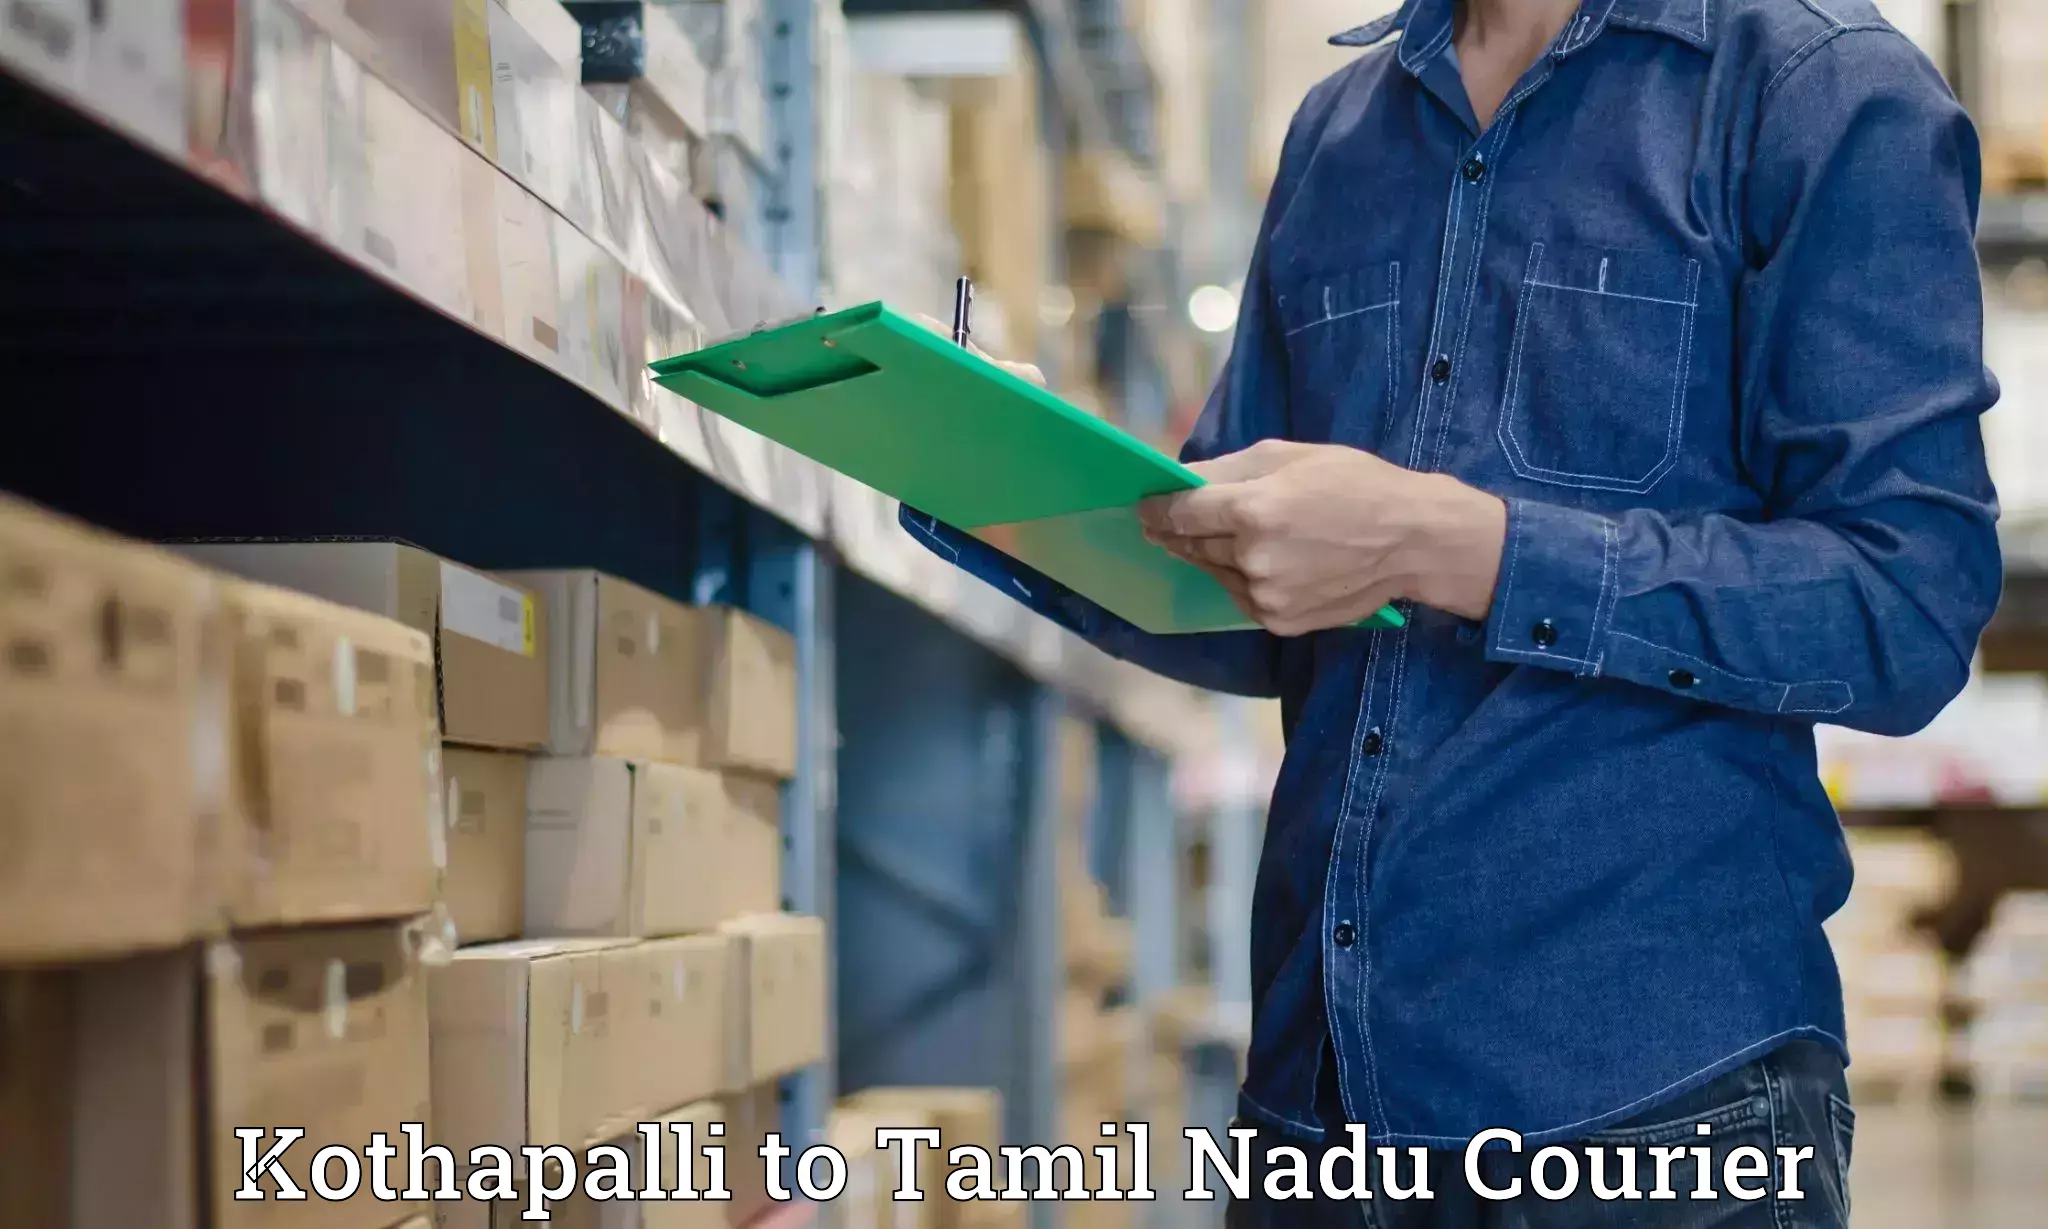 Tailored freight services Kothapalli to Tamil Nadu